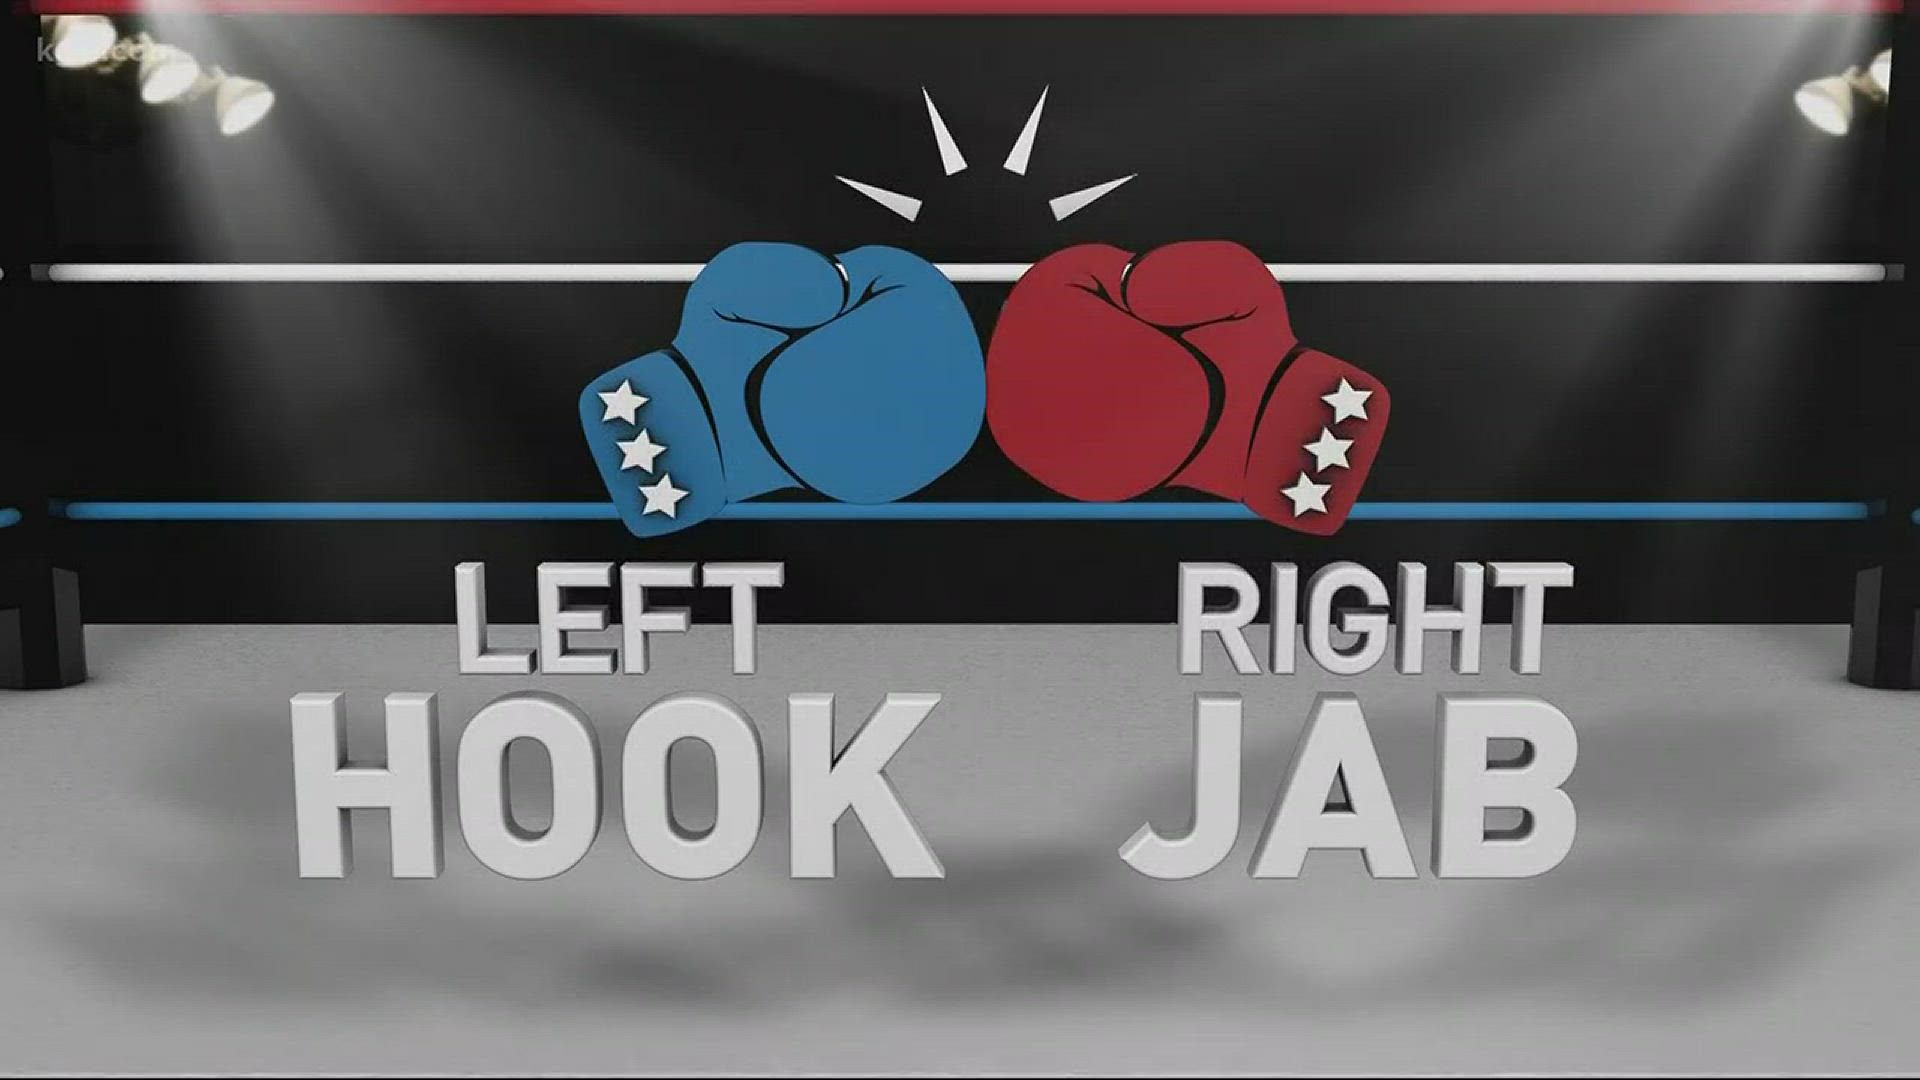 Left Hook Right Jab: New Year's Resolutions